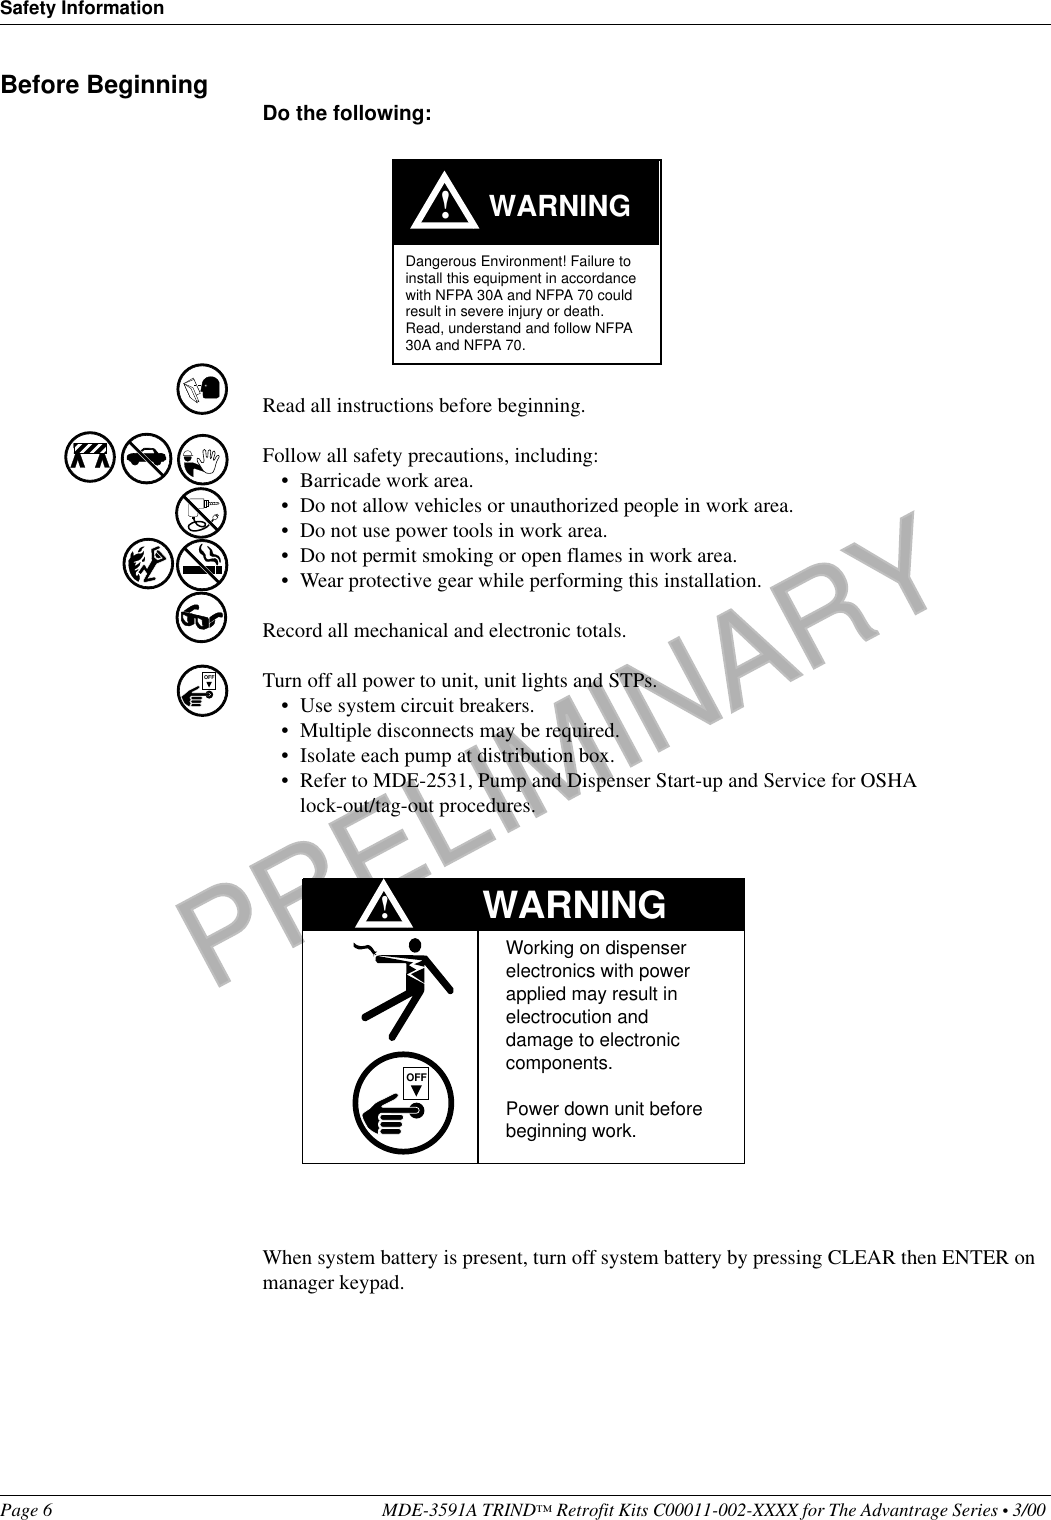 PRELIMINARYSafety InformationPage 6 MDE-3591A TRIND™ Retrofit Kits C00011-002-XXXX for The Advantrage Series • 3/00 Before Beginning Do the following:Read all instructions before beginning.Follow all safety precautions, including:• Barricade work area.• Do not allow vehicles or unauthorized people in work area.• Do not use power tools in work area.• Do not permit smoking or open flames in work area.• Wear protective gear while performing this installation.Record all mechanical and electronic totals.Turn off all power to unit, unit lights and STPs.• Use system circuit breakers.• Multiple disconnects may be required.• Isolate each pump at distribution box.• Refer to MDE-2531, Pump and Dispenser Start-up and Service for OSHA lock-out/tag-out procedures.When system battery is present, turn off system battery by pressing CLEAR then ENTER on manager keypad.WARNING!Dangerous Environment! Failure to install this equipment in accordance with NFPA 30A and NFPA 70 could result in severe injury or death.Read, understand and follow NFPA 30A and NFPA 70.OFFWARNINGWorking on dispenser   electronics with power   applied may result in   electrocution and   damage to electronic   components.Power down unit before beginning work.OFF!